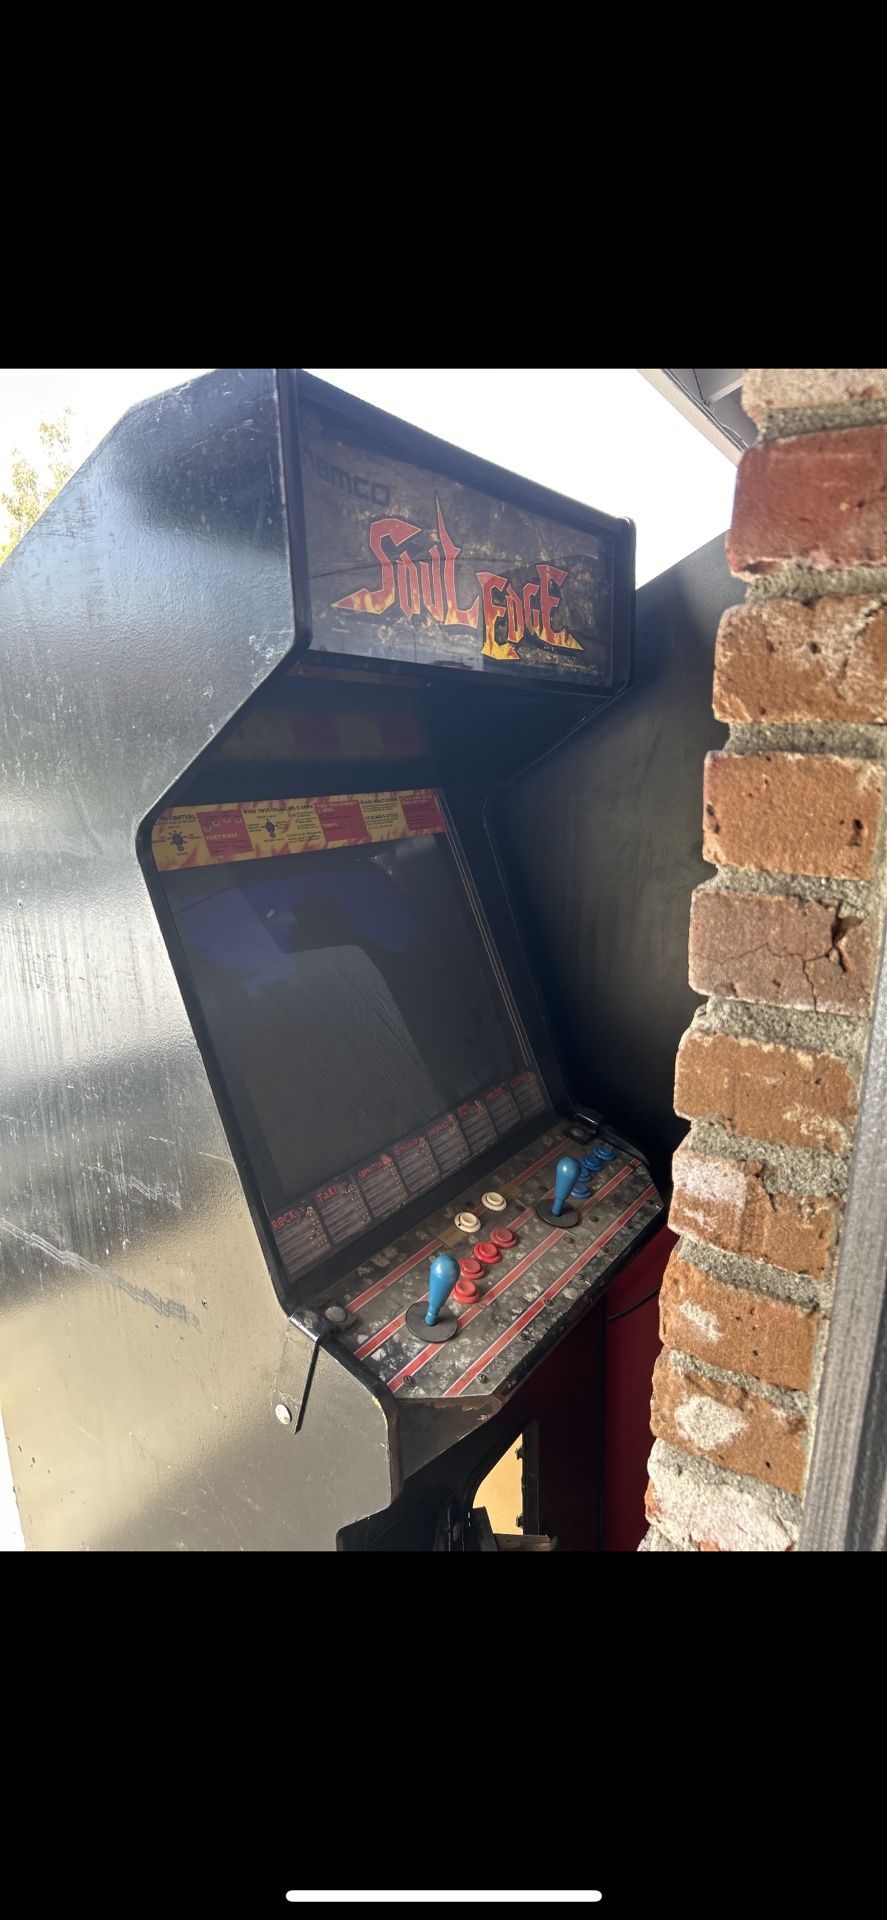 Soul Edge Arcade Video Game Machine With 19” Monitor 